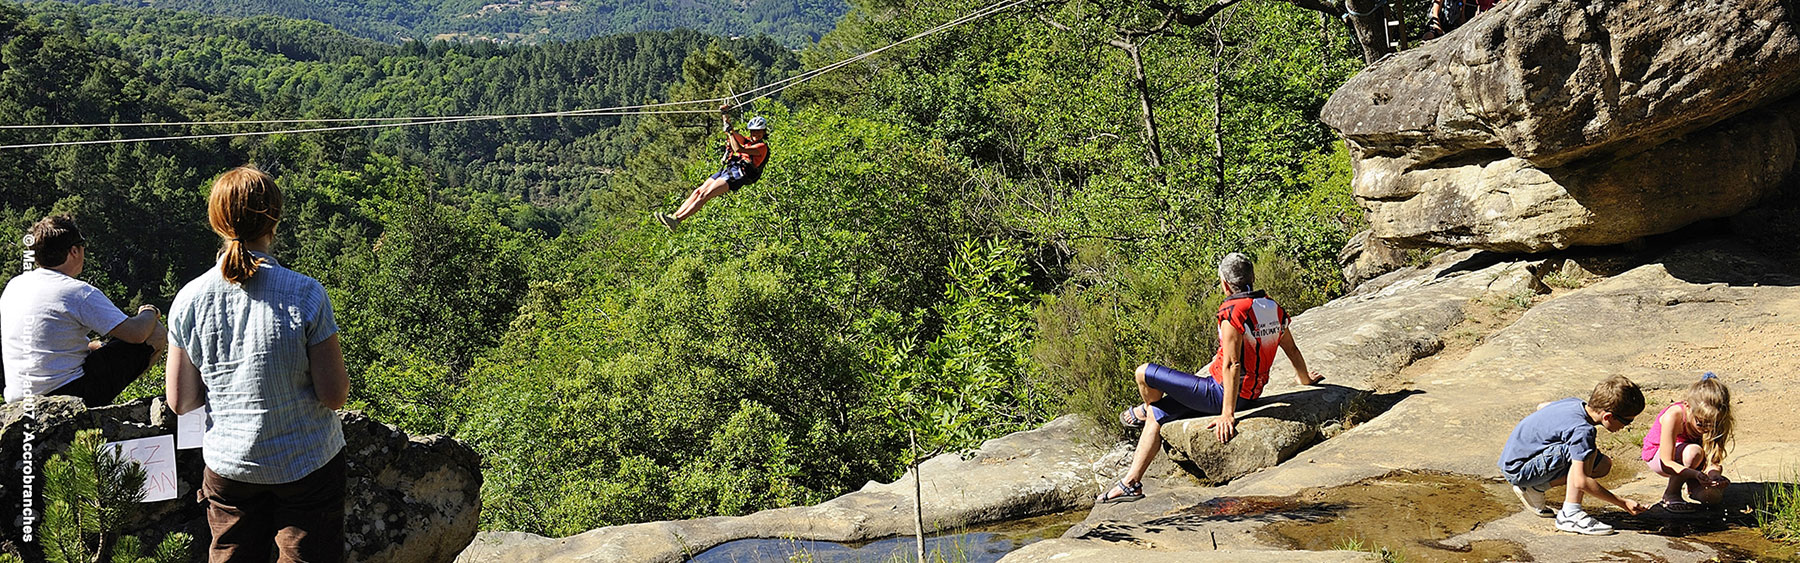 Holiday in the Ardèche : Outdoor sports